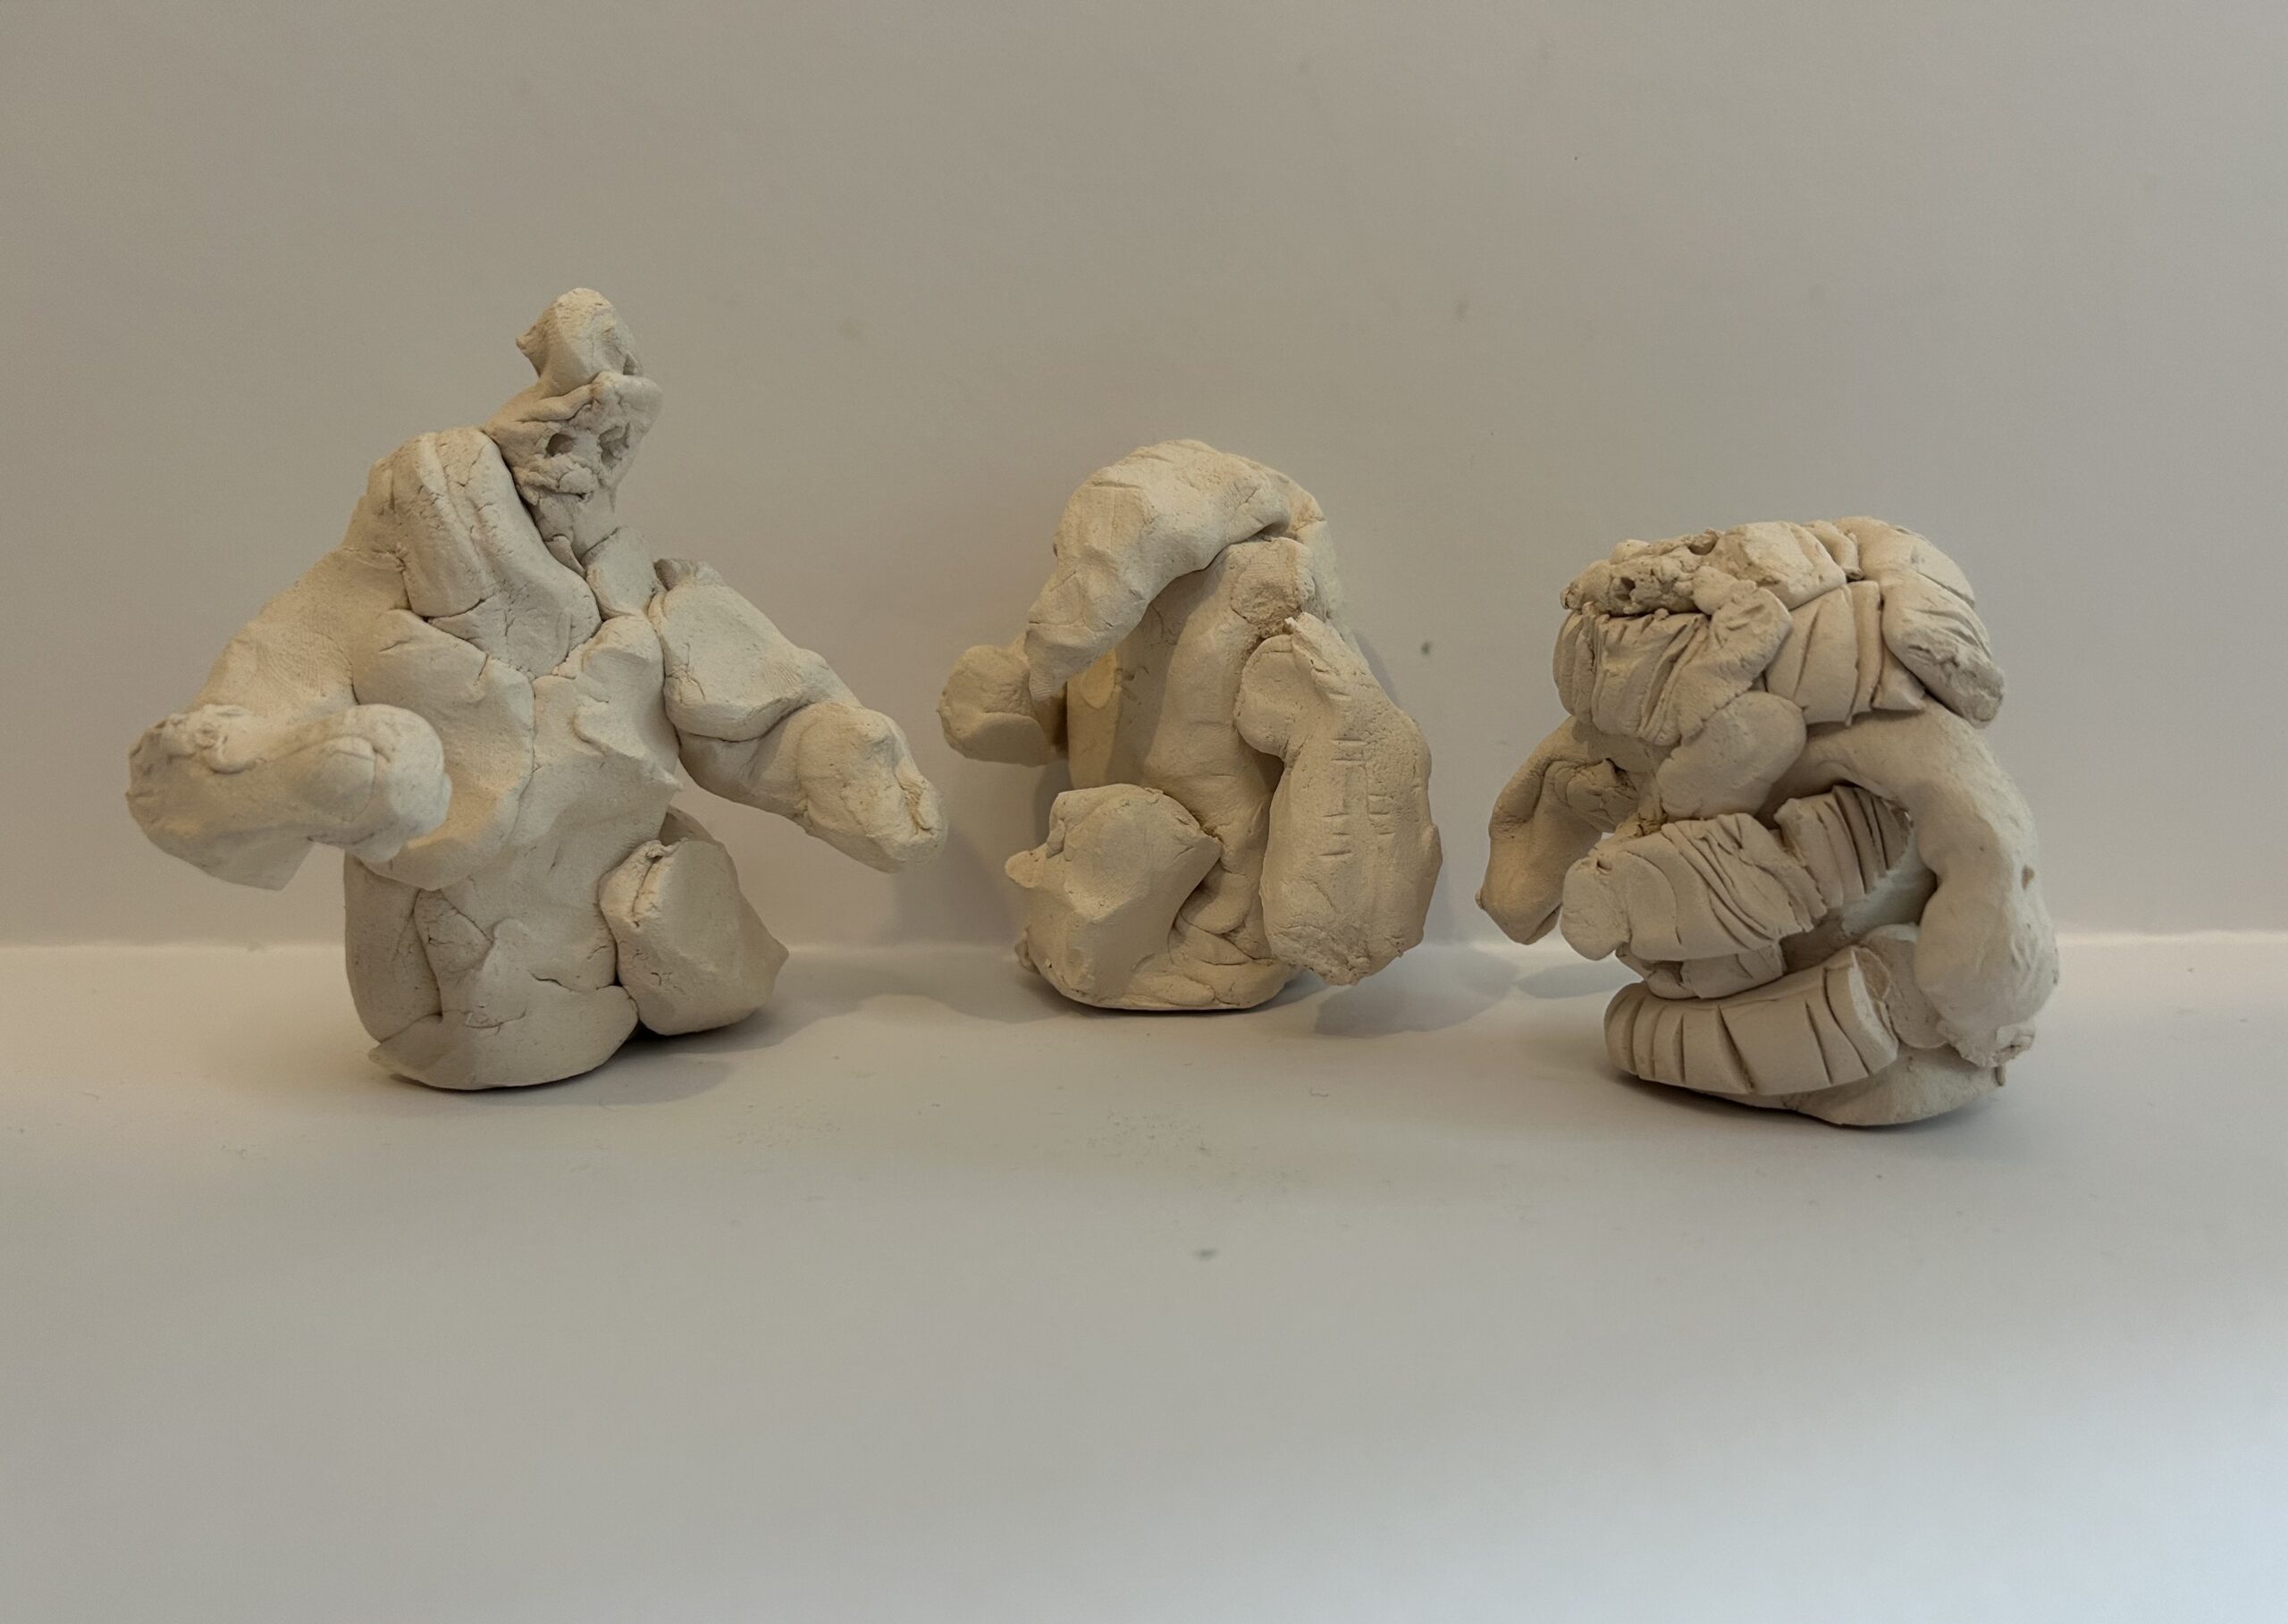 3 abstract creature-humanoid clay sculptures places as though they are having a conversation in a semi-circle, all by a child